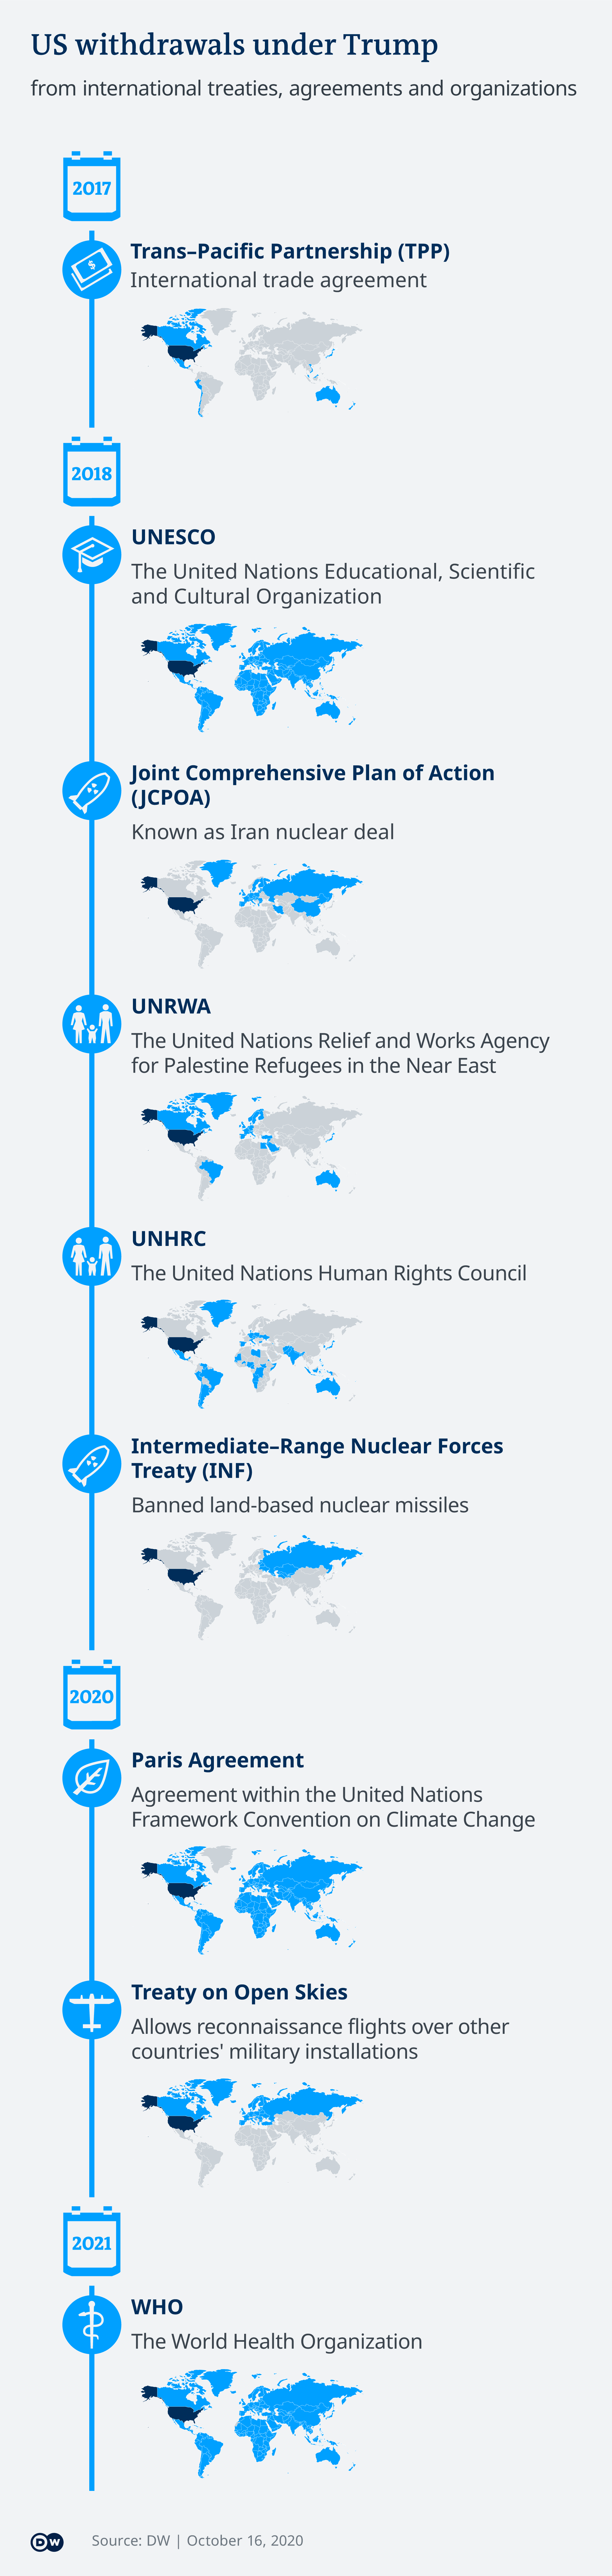 Infographic showing Trump's decisions to leave international partnerships